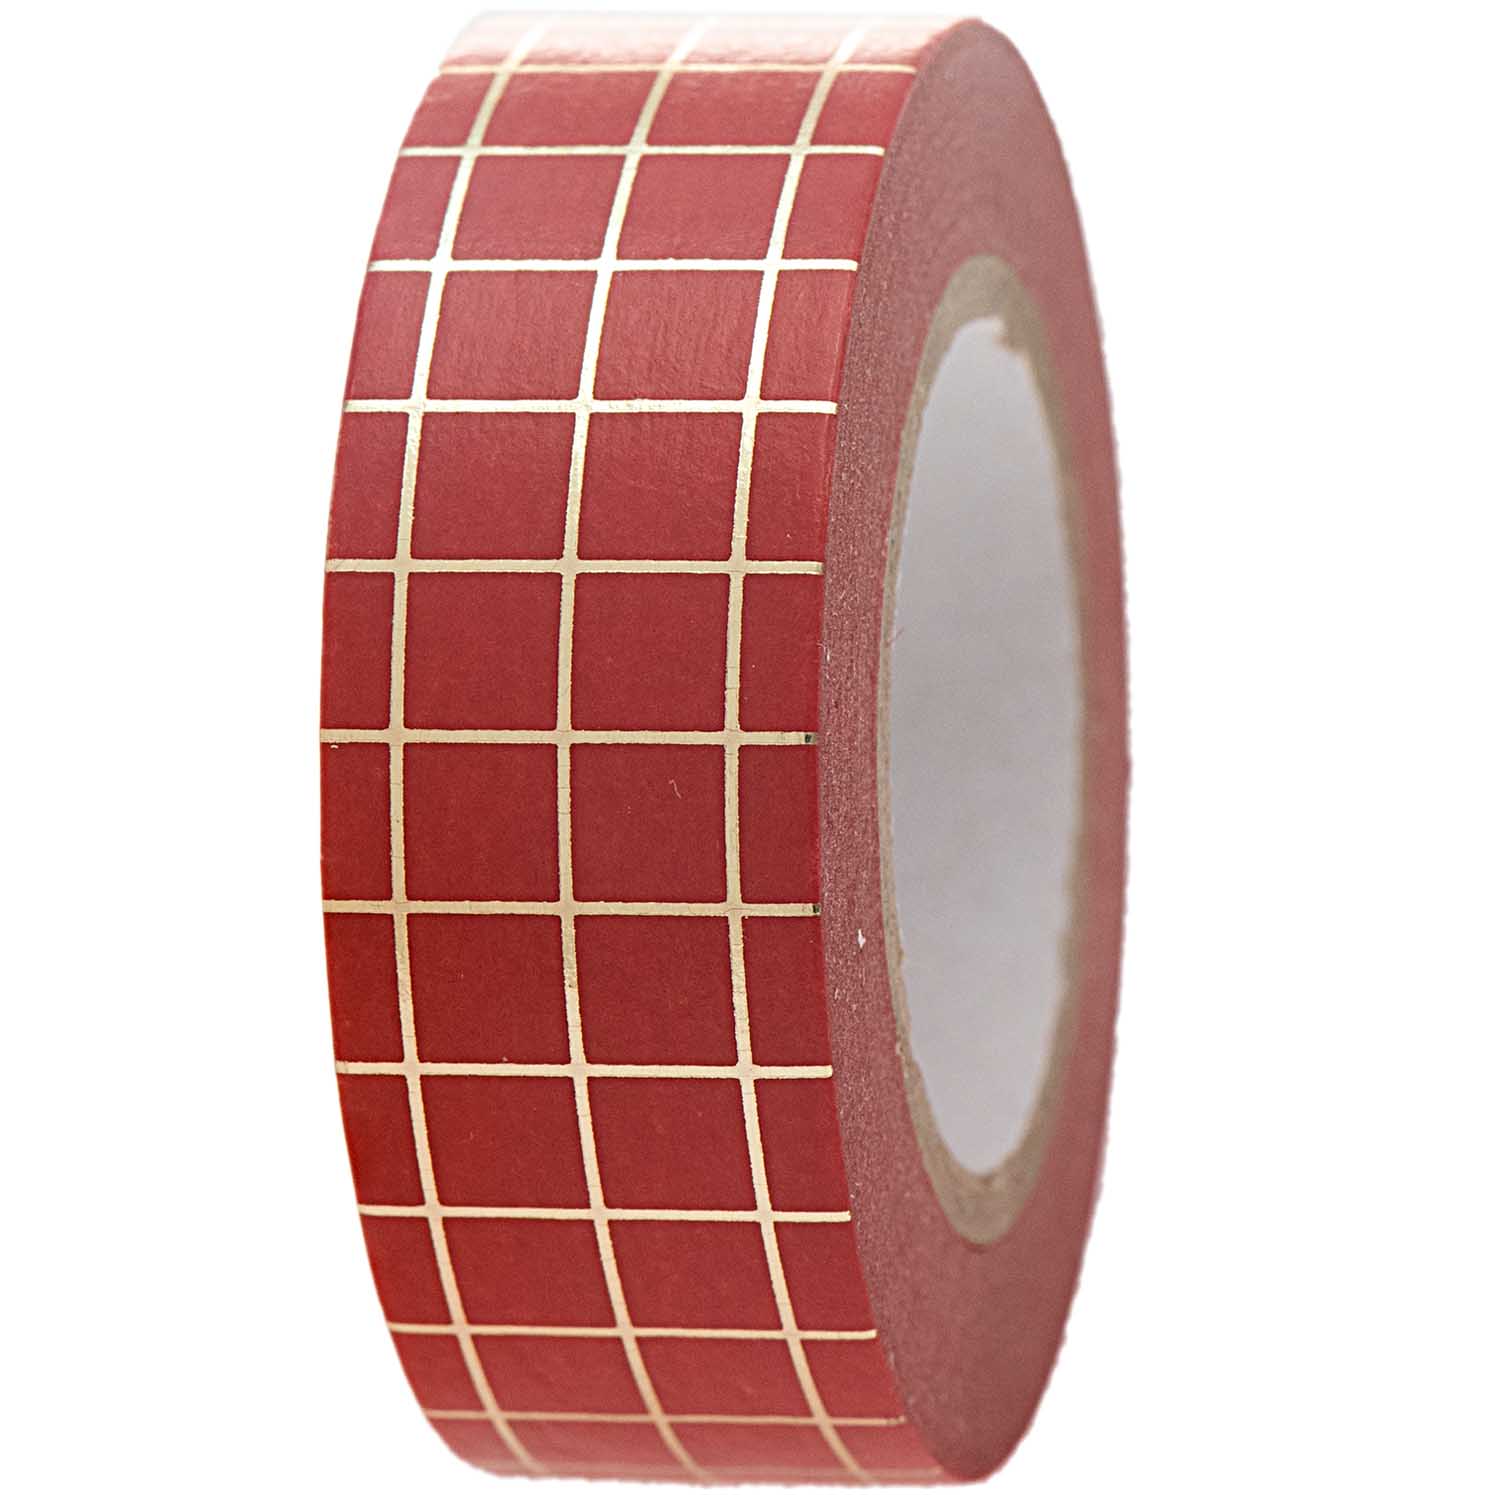 tape 15mm - Xmas is in the air - rood/goud – Papiermier